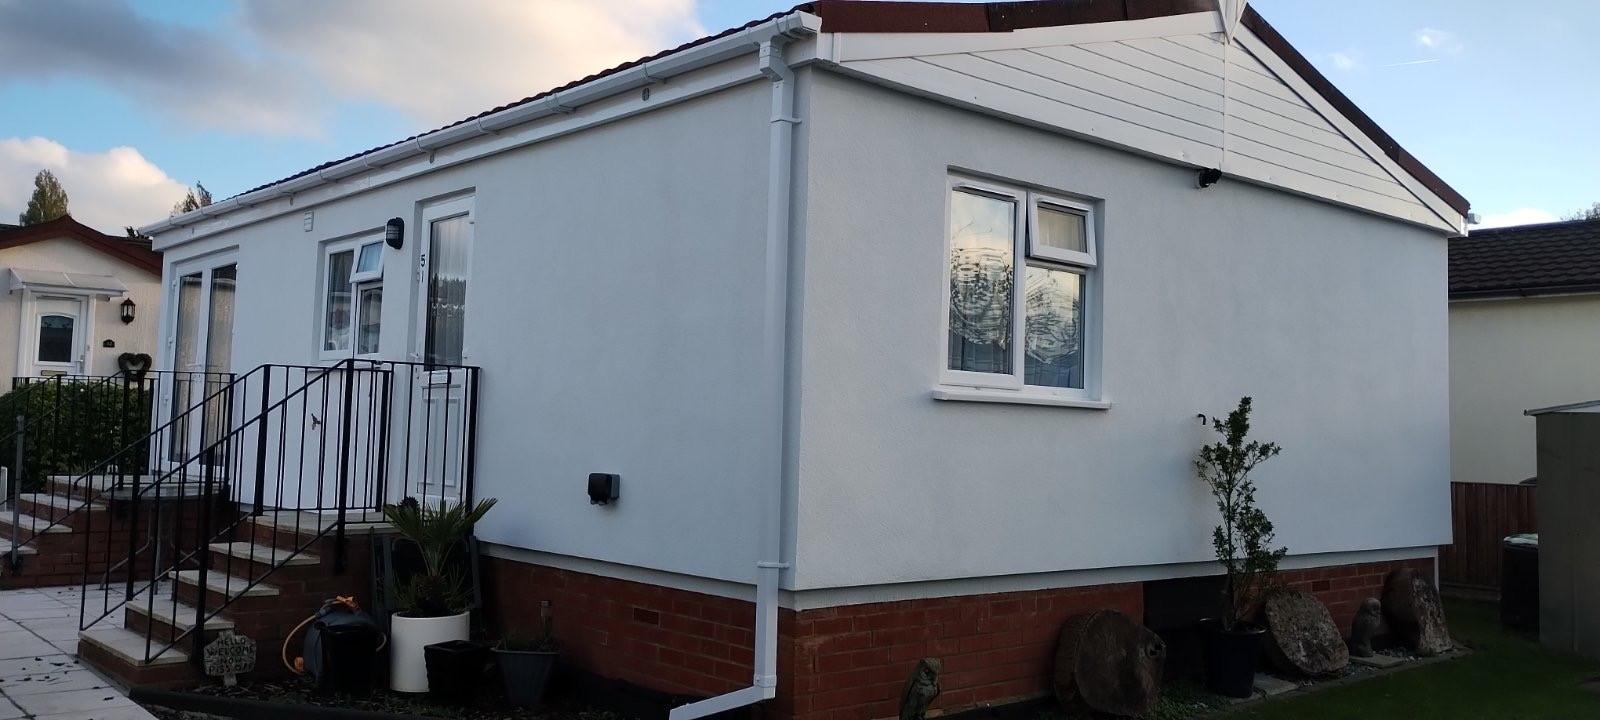 A home which has had works undertaken has part of the Warm Homes programme.